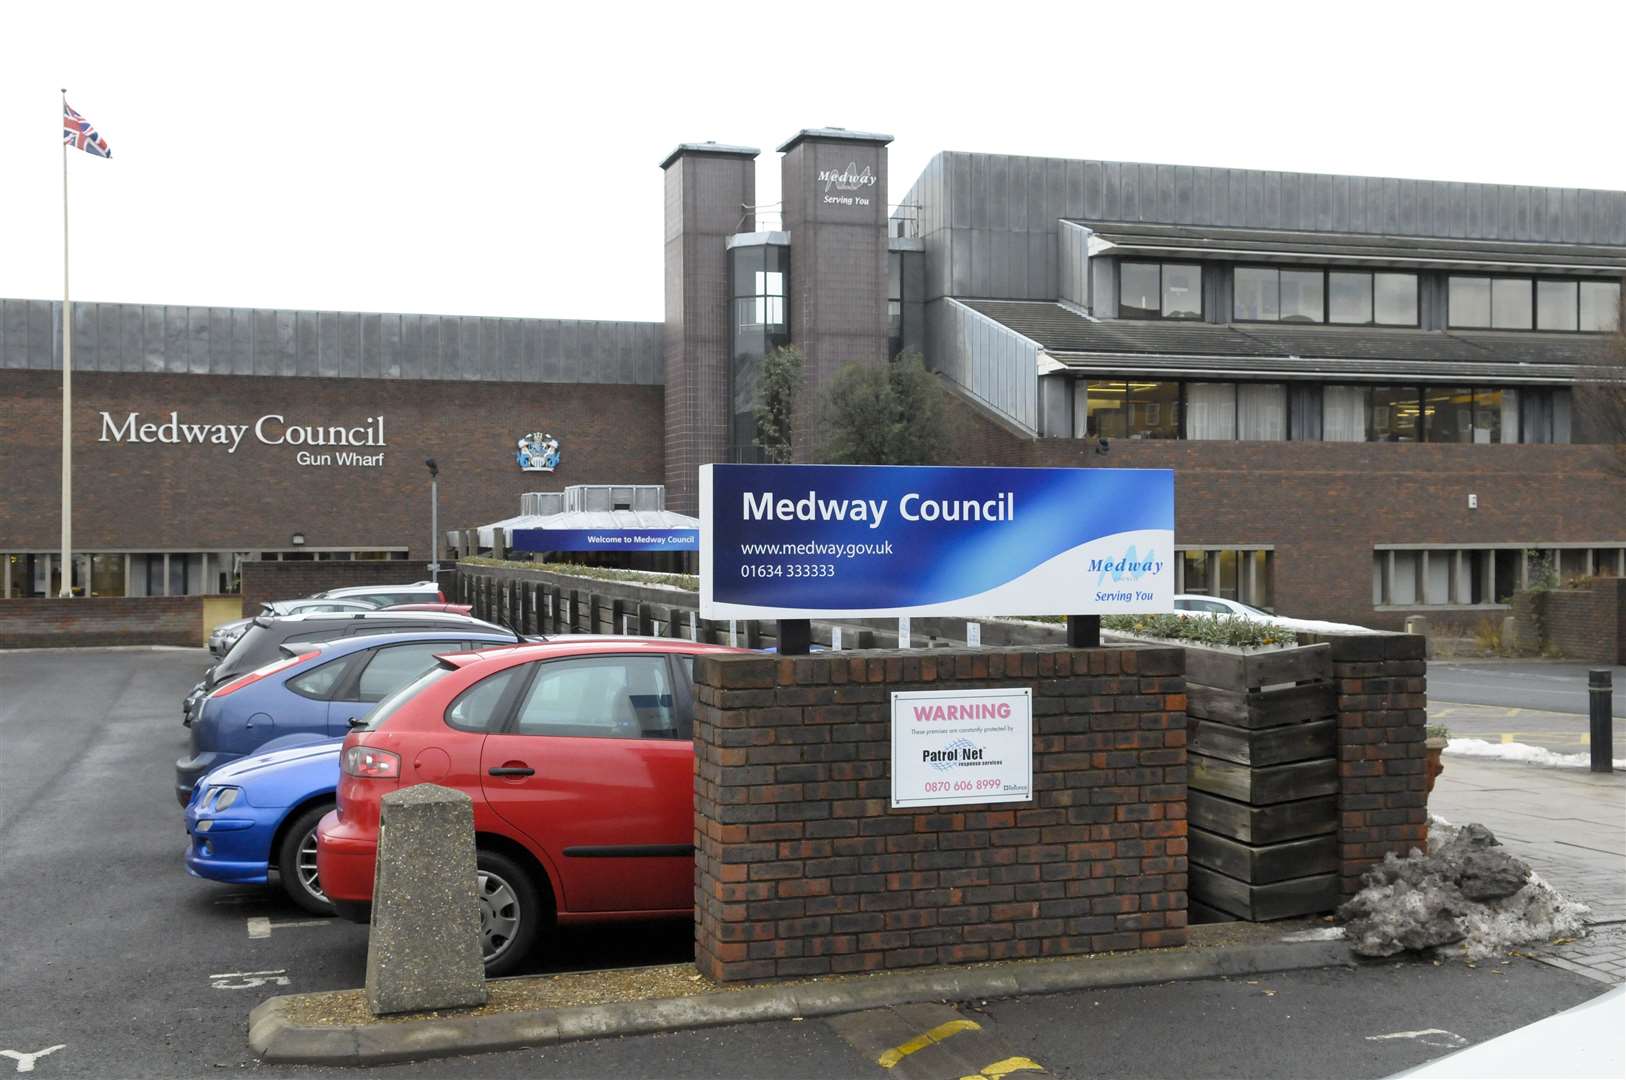 GP services in Medway were criticised during a meeting at Gun Wharf, in Chatham, on Thursday, Jan 15